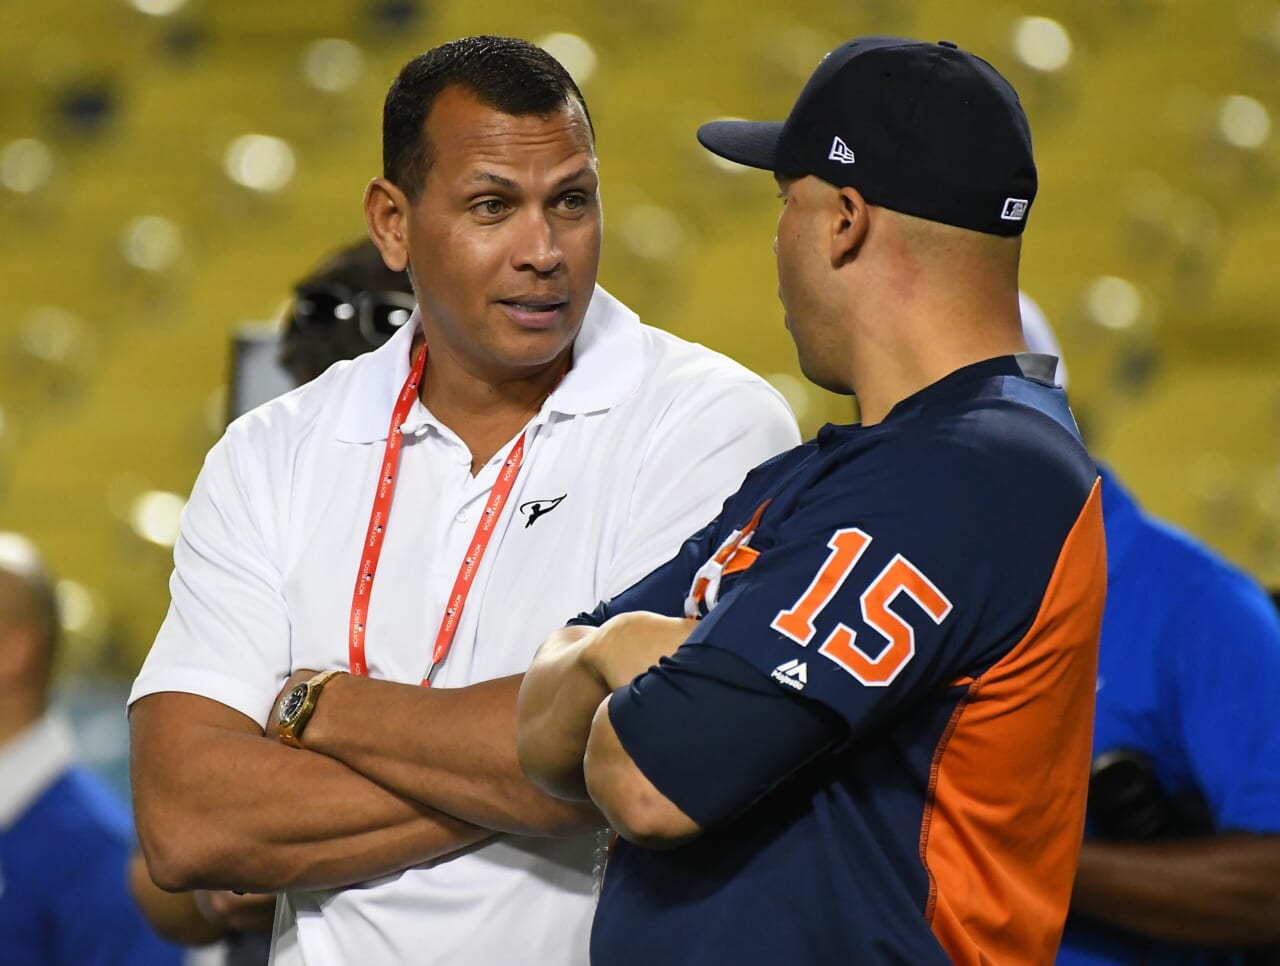 Jose Canseco’s beef with former Yankees’ star Alex Rodriguez has a new episode